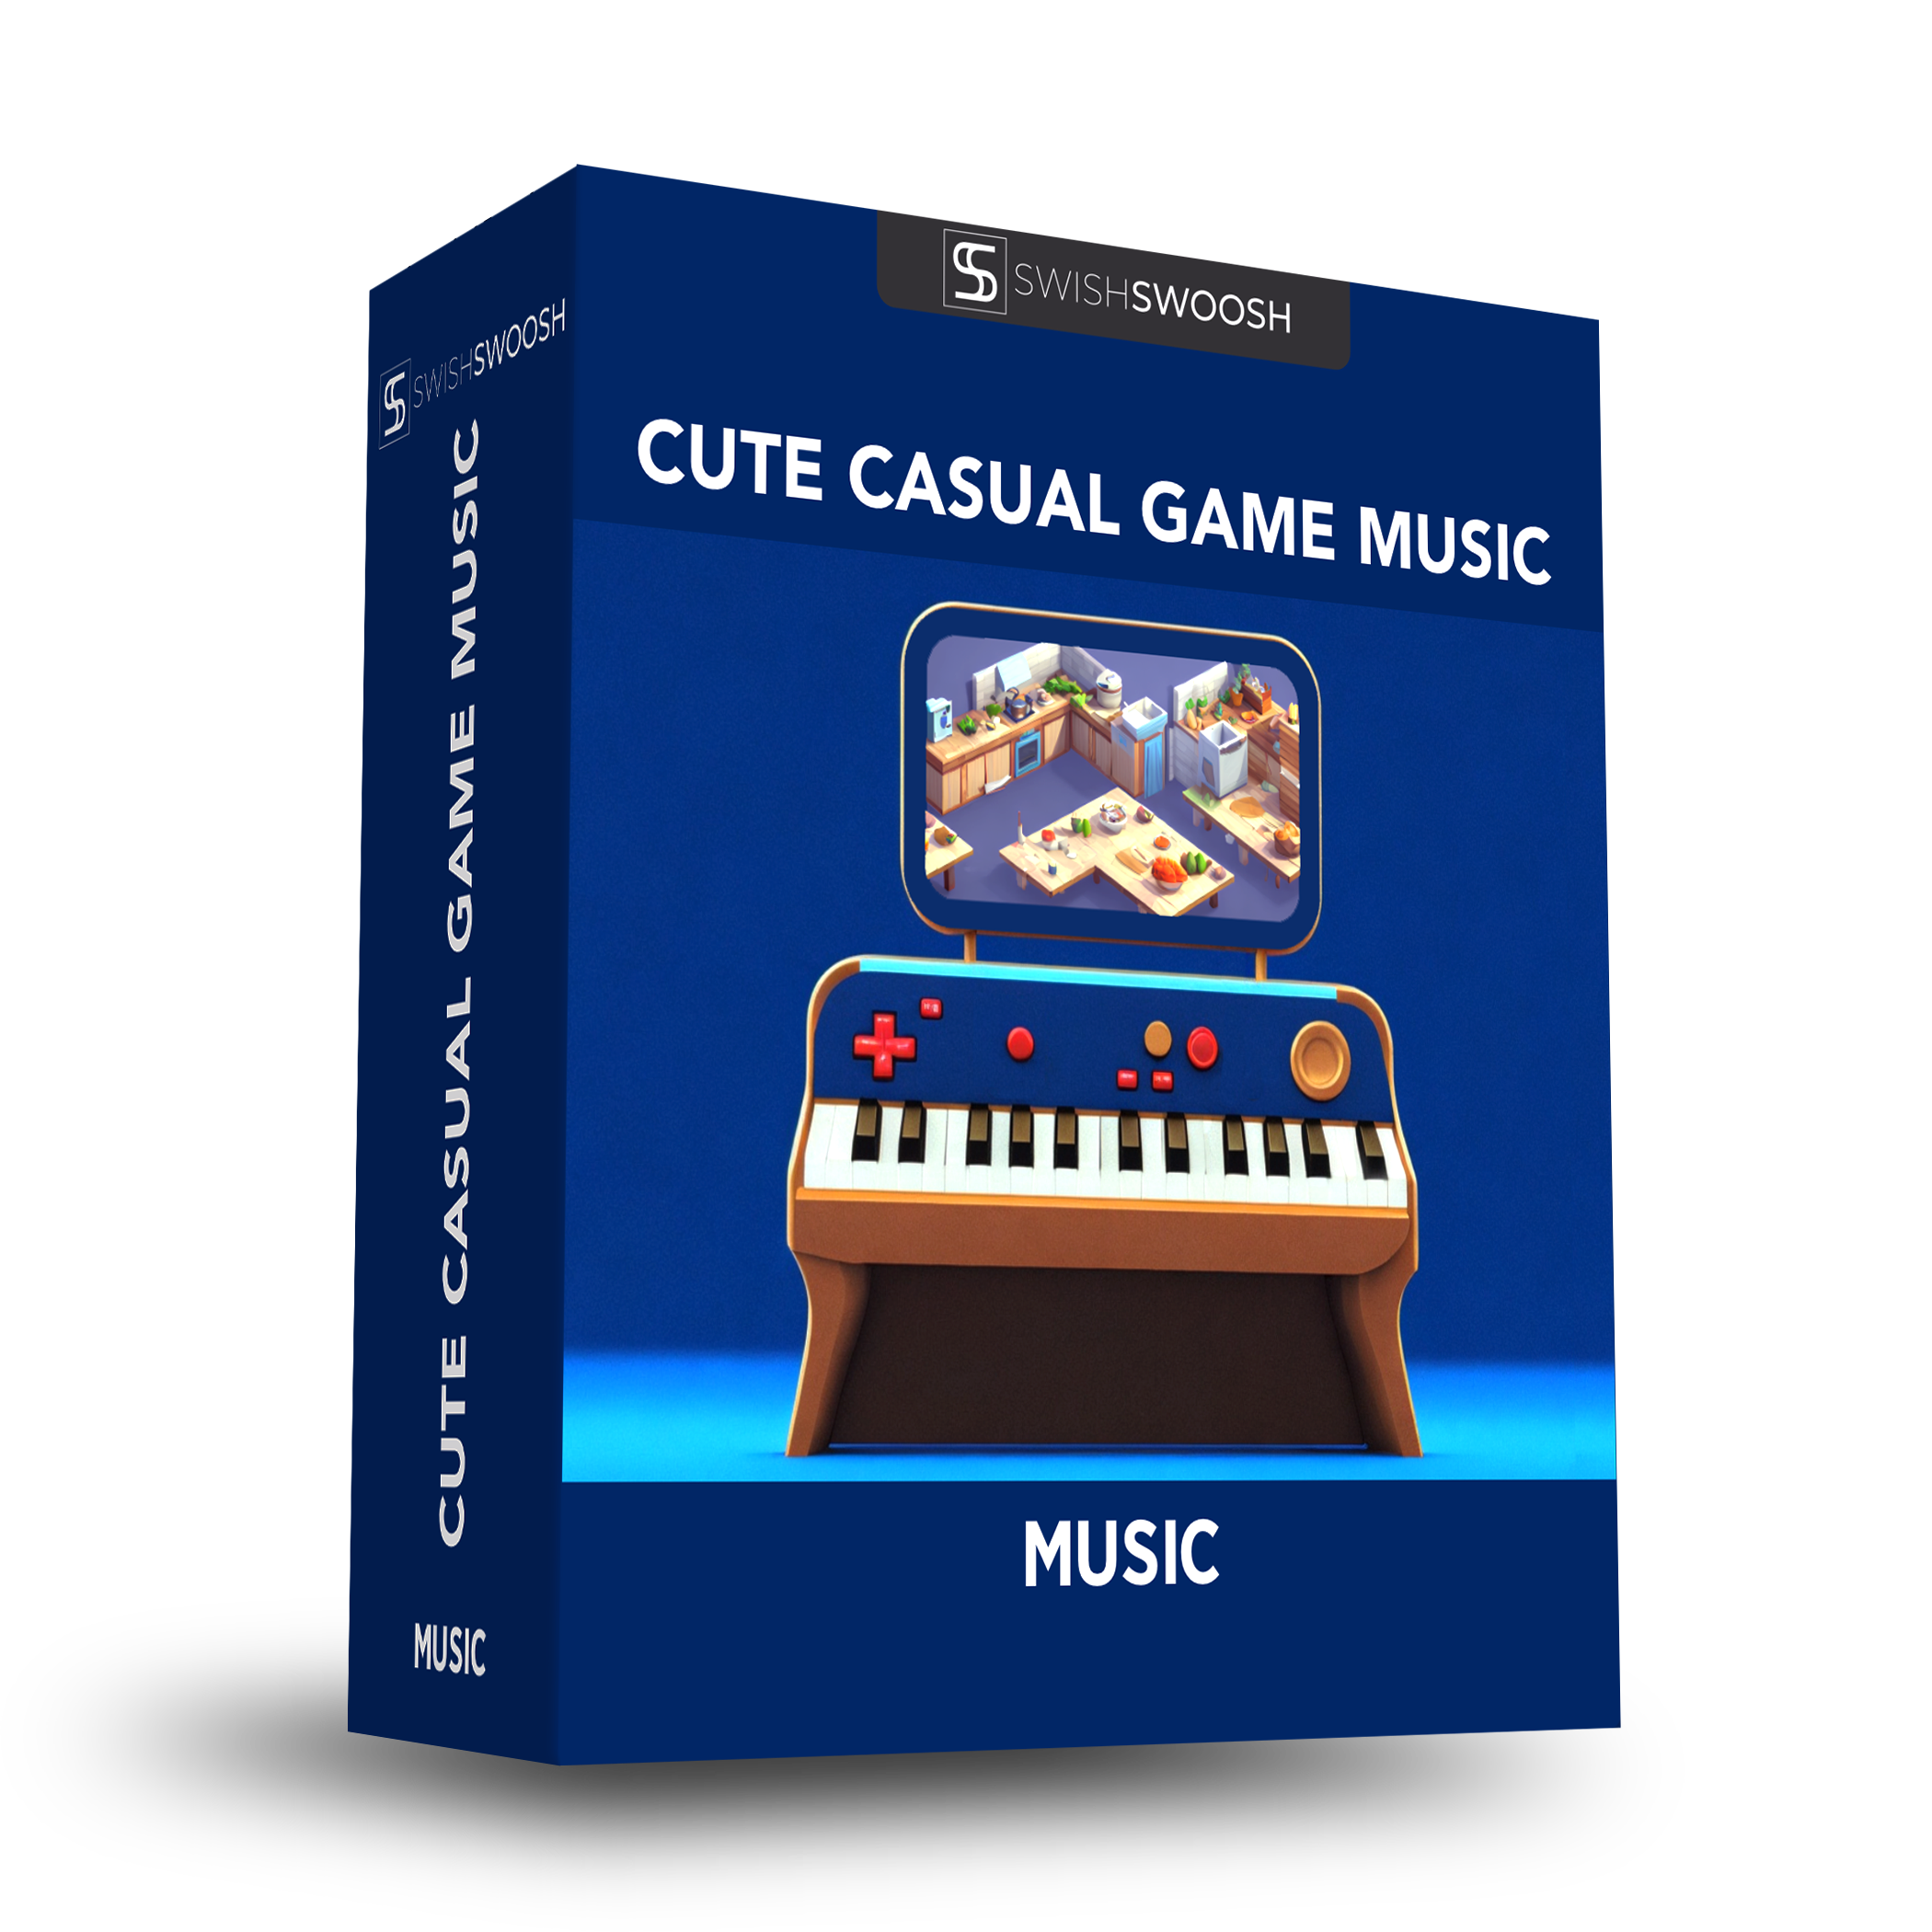 Serious music for a casual game